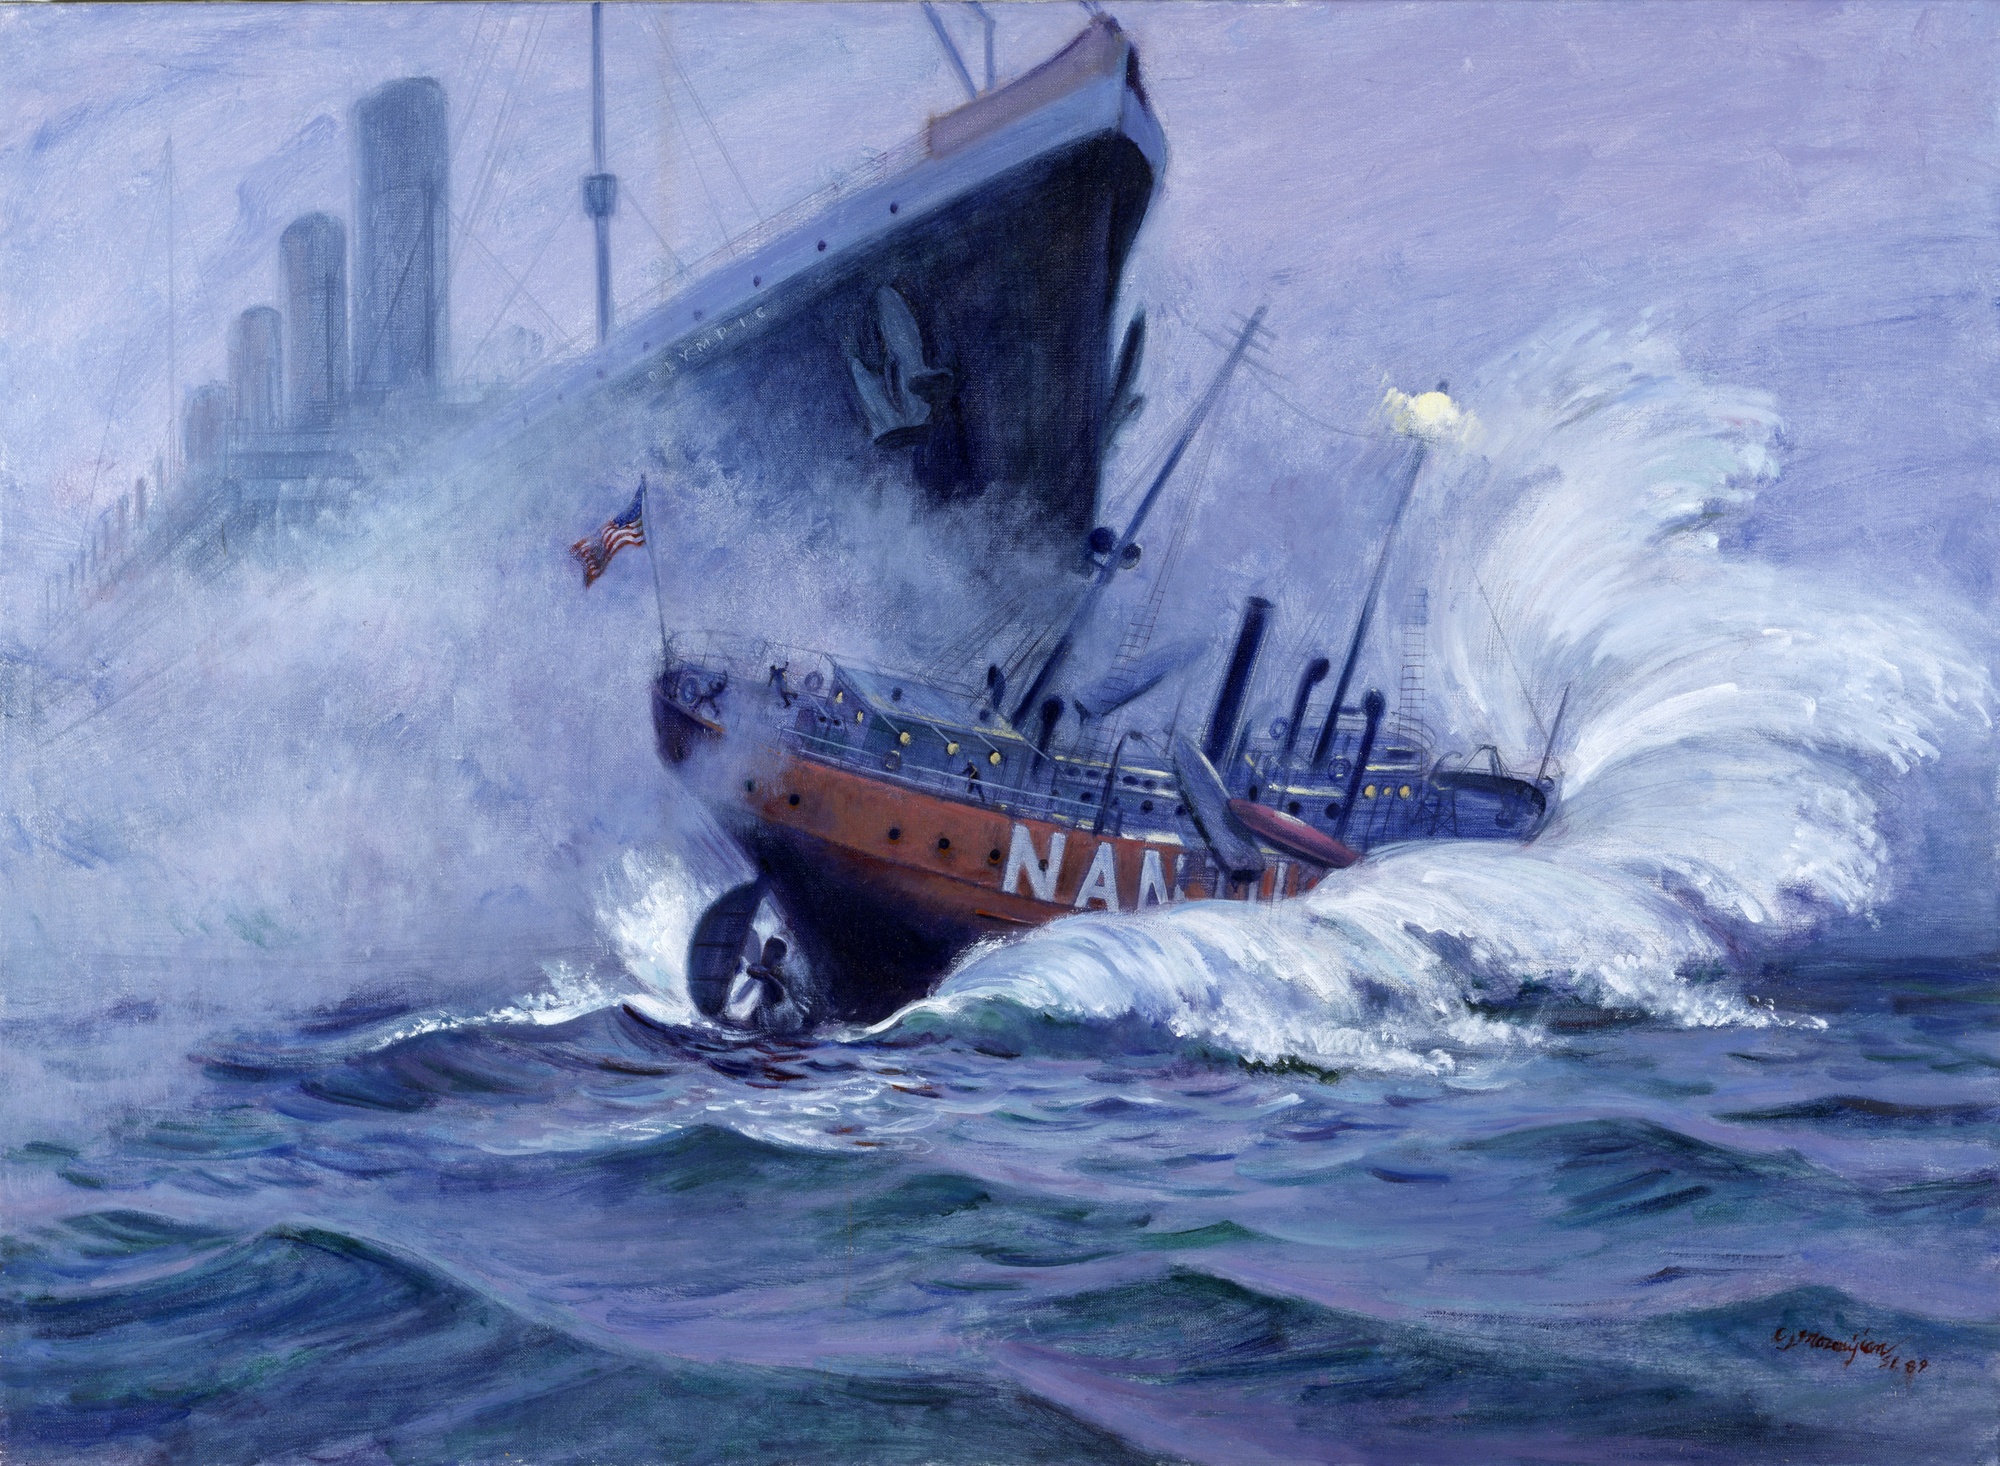 DVIDS - Images - Lightship Nantucket Sunk by RMS Olympic by Charles  Mazoujian